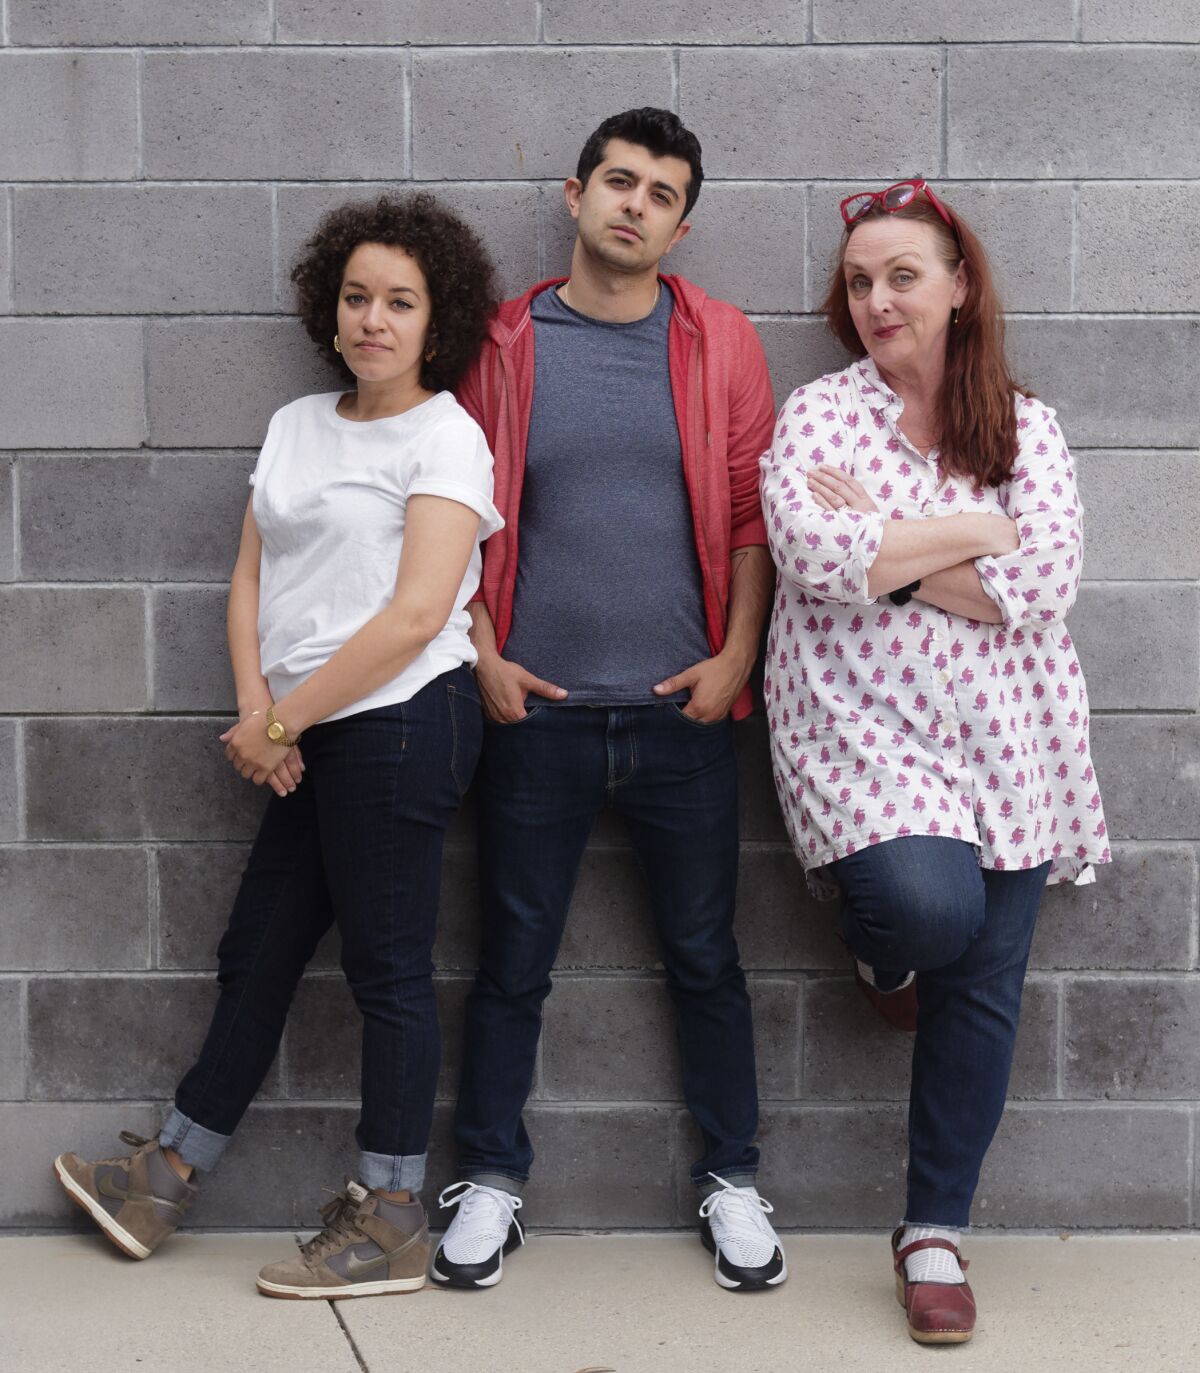 Shannon Matesky, Behzad Dabu and Linda Libby (from left) appear in Ike Holter's world-premiere work "Put Your House in Order" at La Jolla Playhouse.